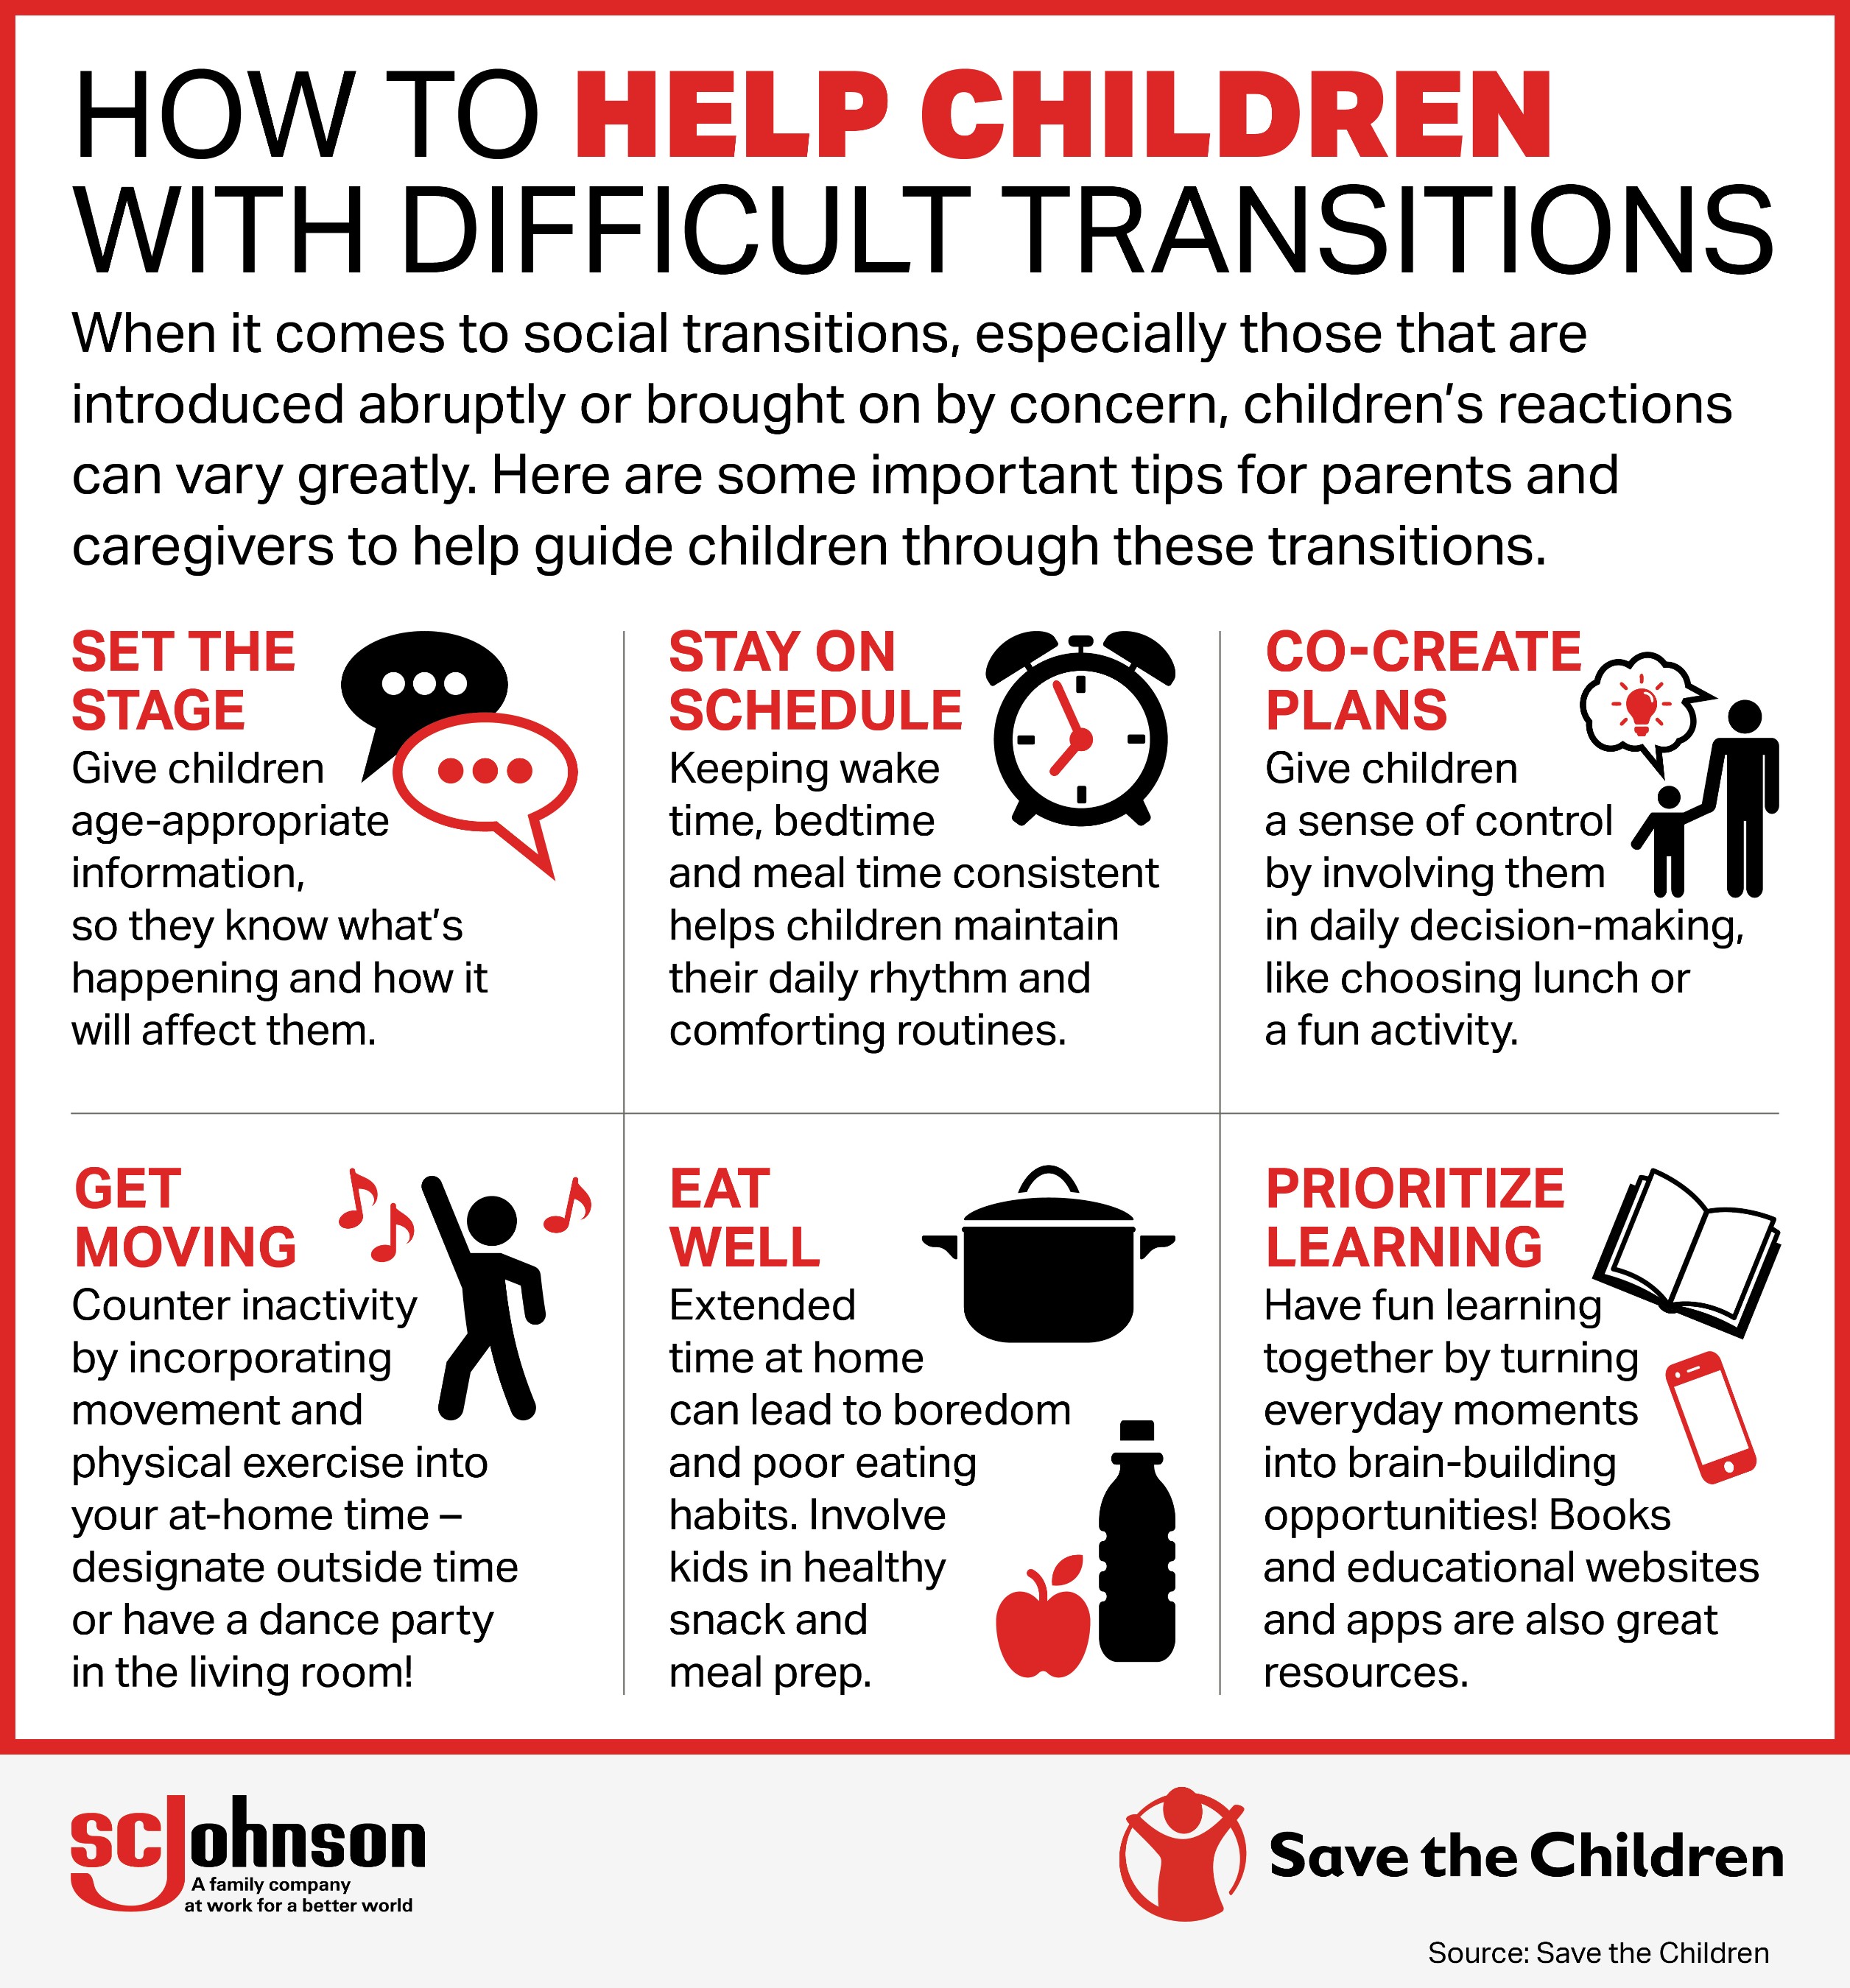 How to help children with difficult transitions